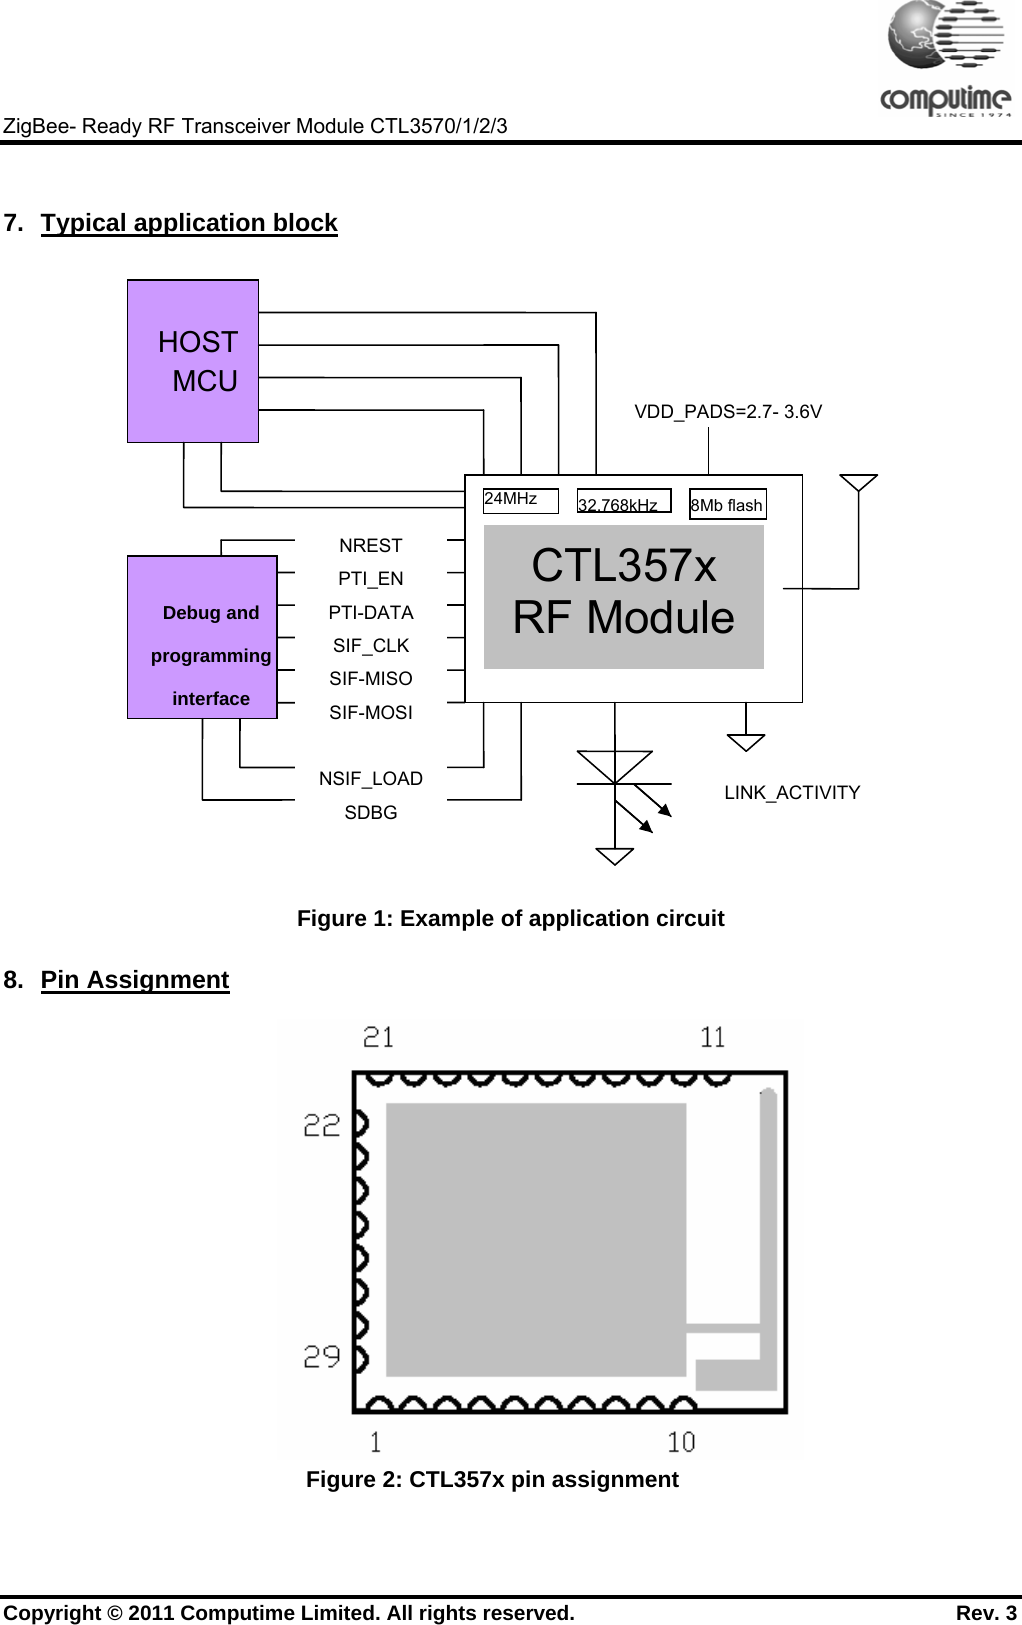     ZigBee- Ready RF Transceiver Module CTL3570/1/2/3 Copyright © 2011 Computime Limited. All rights reserved.                                                       Rev. 3  7.  Typical application block  Figure 1: Example of application circuit 8. Pin Assignment  Figure 2: CTL357x pin assignment  CTL357x RF Module VDD_PADS=2.7- 3.6V  Debug and programming interface  HOST MCU NREST PTI_EN PTI-DATA SIF_CLK SIF-MISO SIF-MOSI  NSIF_LOAD SDBG LINK_ACTIVITY 8Mb flash 24MHz 32.768kHz